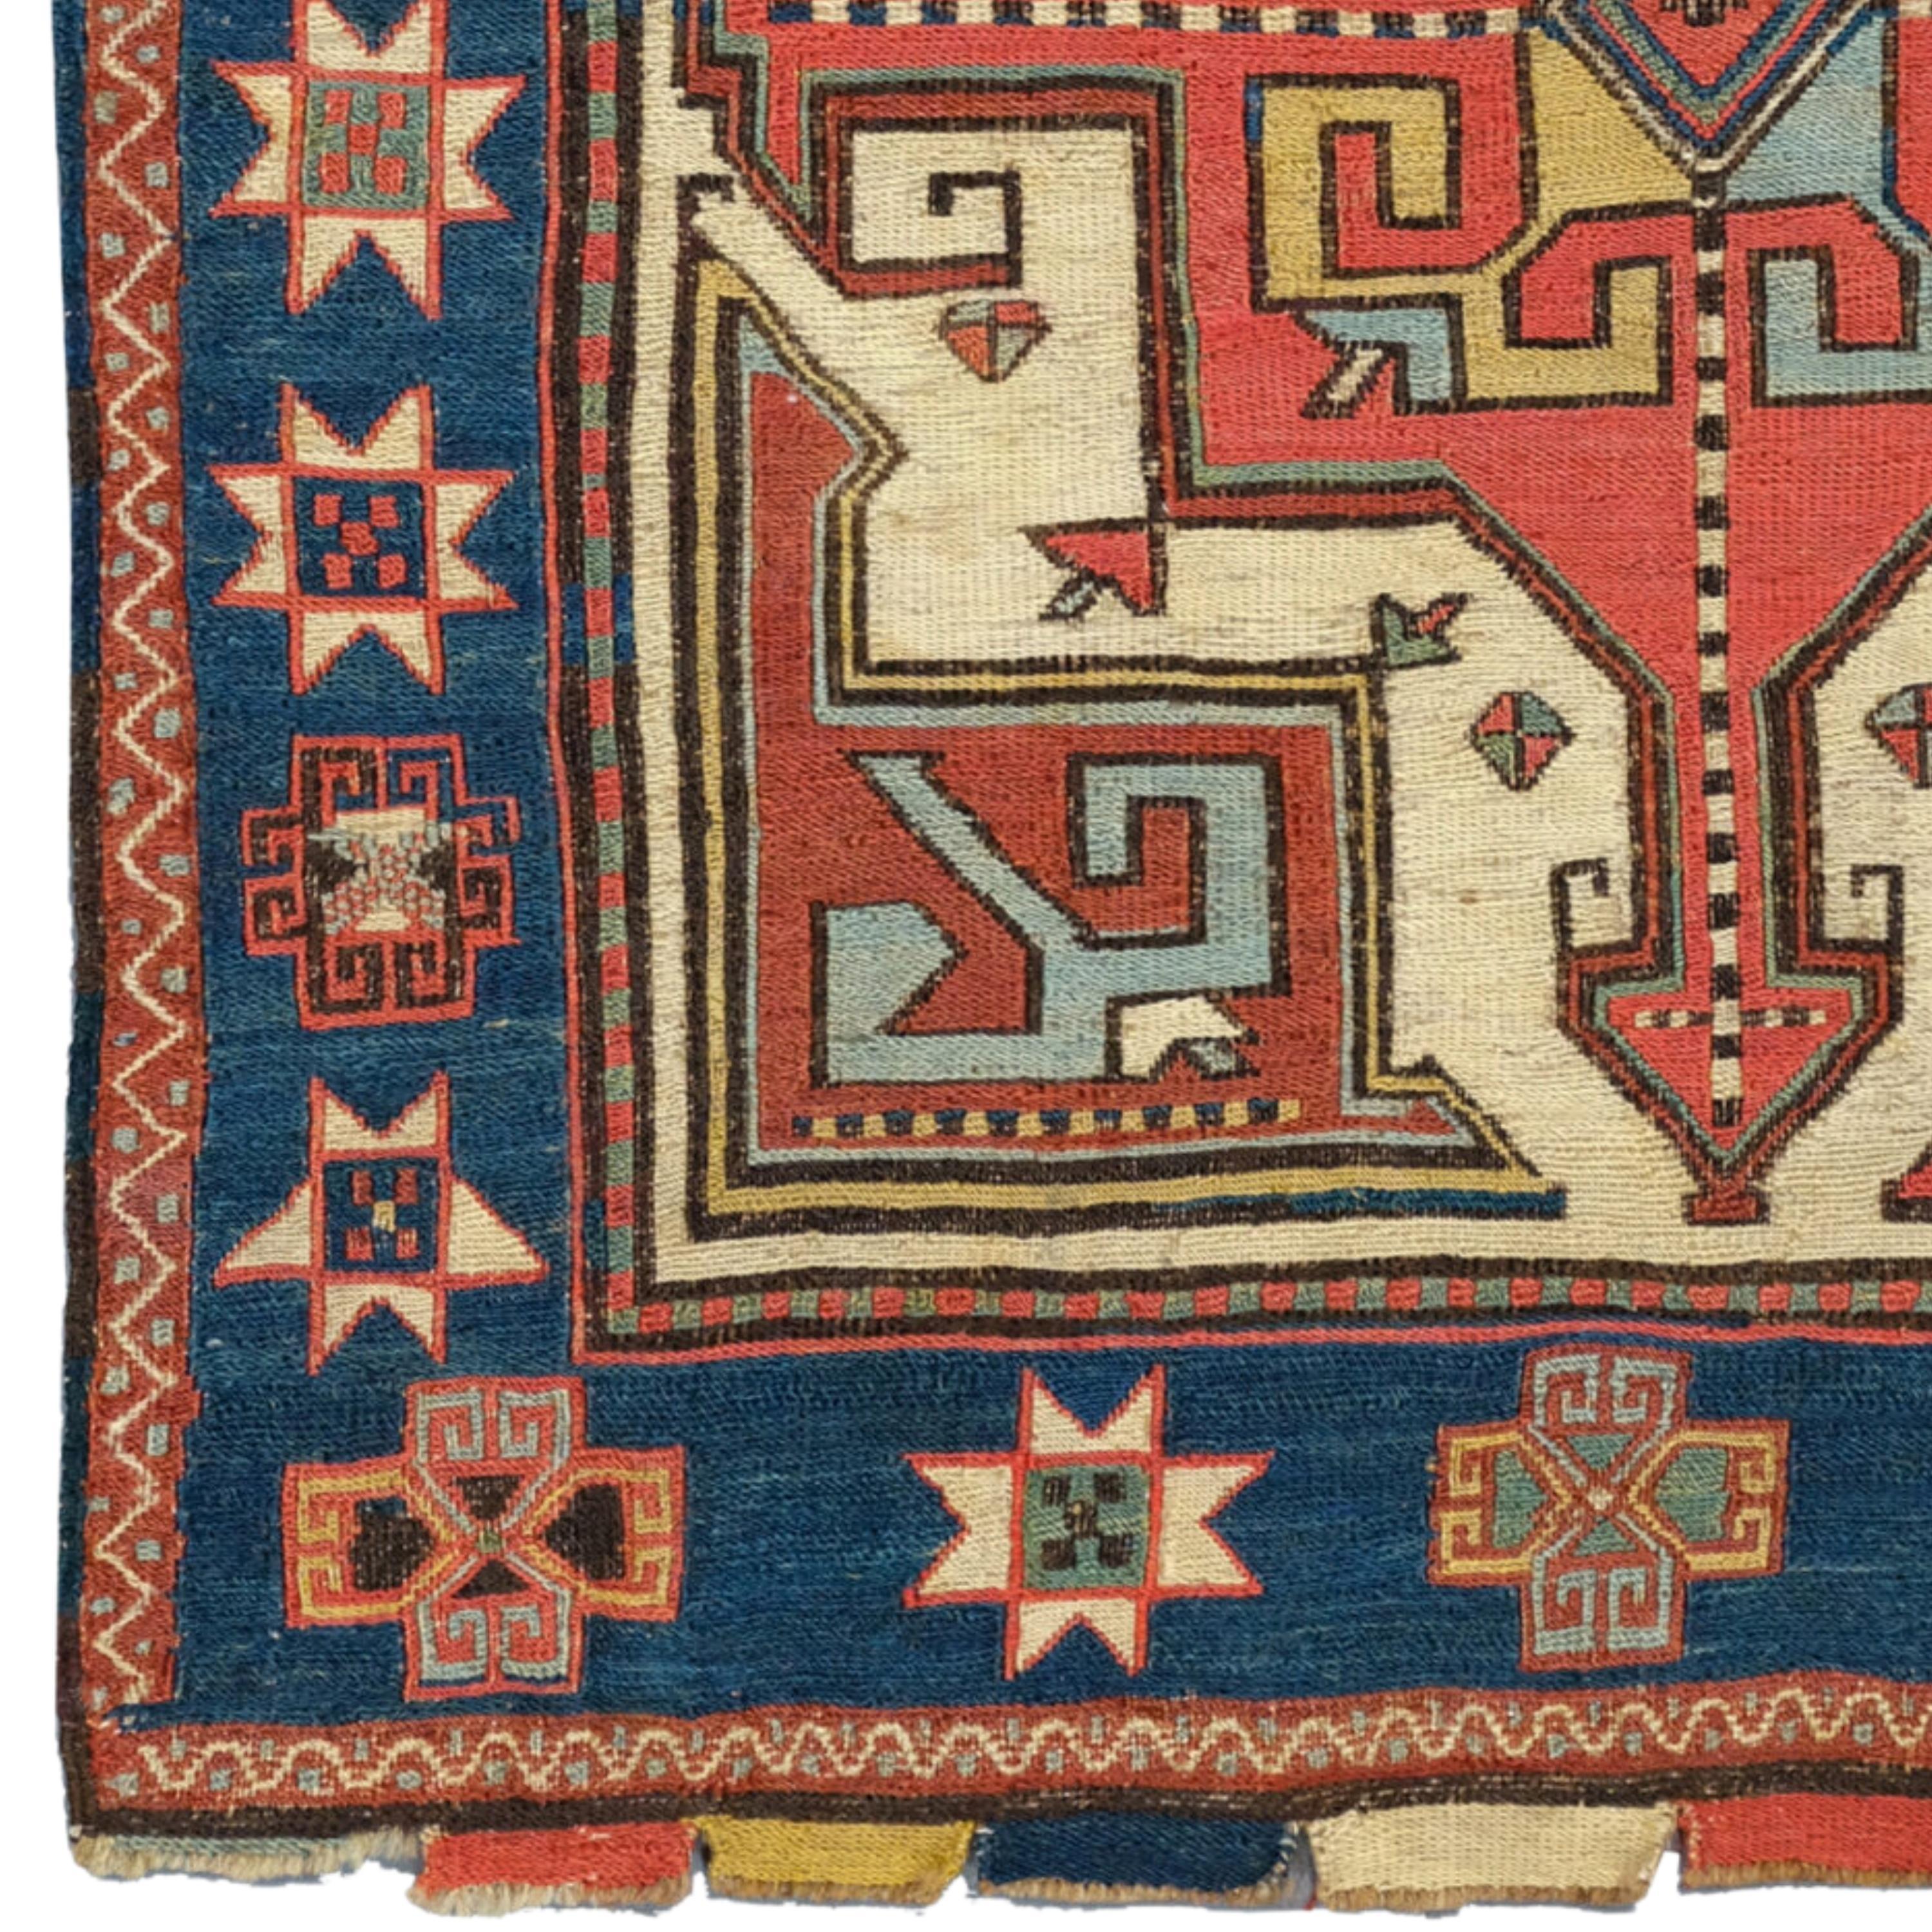 Antique Shahsavan Bag Face | Caucasian Rugs
Size : 52×58 cm (20,4x22,8 In)

Finely woven in the sumakh technique, this half of a Moghan Shahsavan double bag displays a box-shaped medallion decorated with arrows and a main border of hooked diamonds.